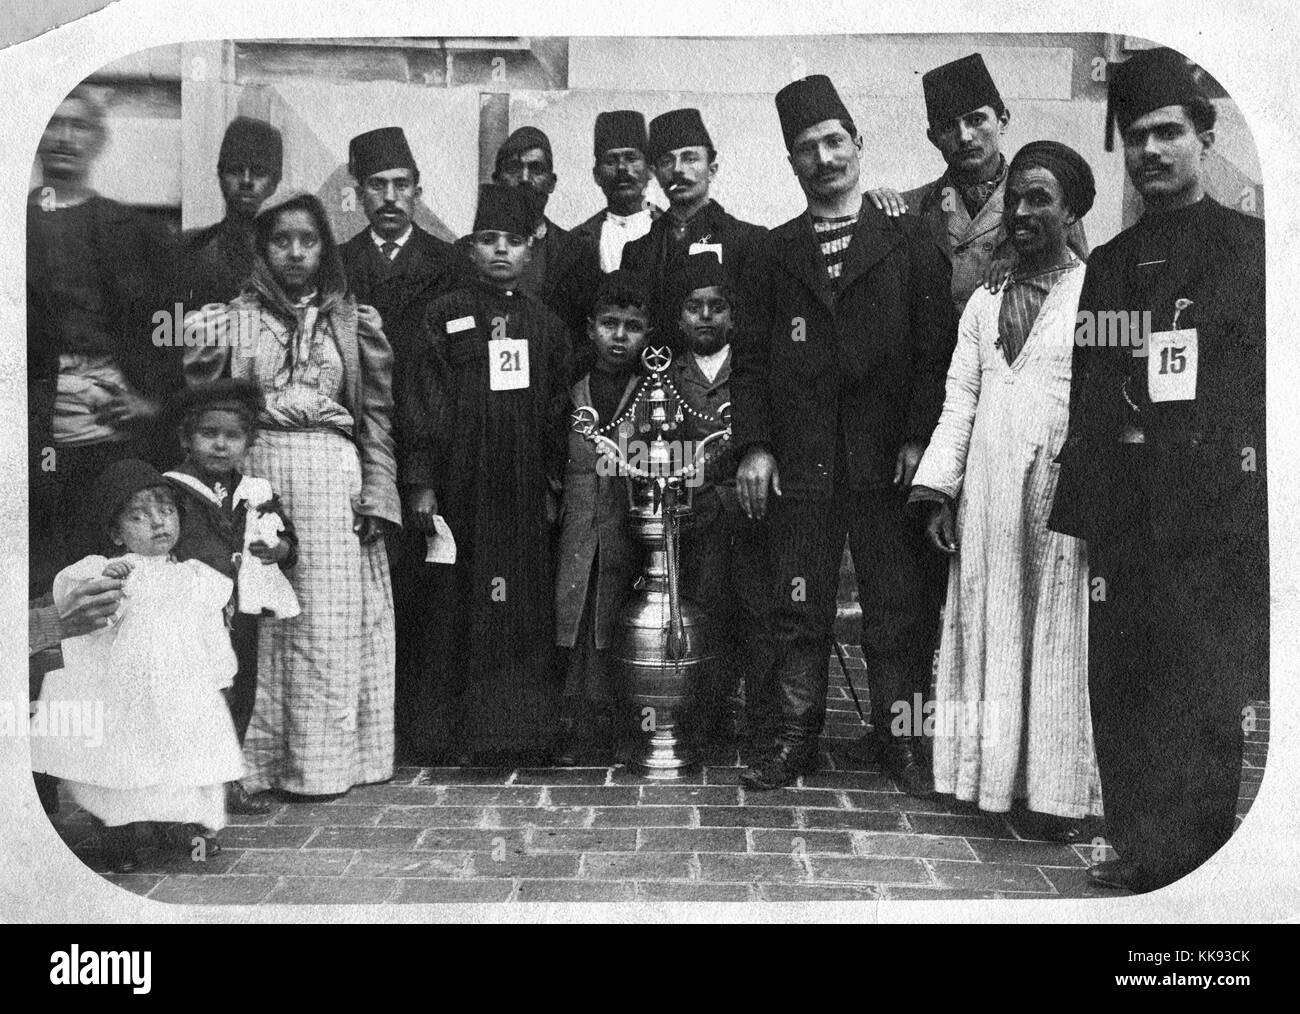 A photograph of a group of immigrants on Ellis Island, most of the men and some of the boys are wearing fezzes, there are several young children in photo, at the center of the group is a large metallic vessel that contains three star and crescent symbols which are used by the Muslim religion and by Ottoman Turks, New York, 1907. From the New York Public Library. Stock Photo